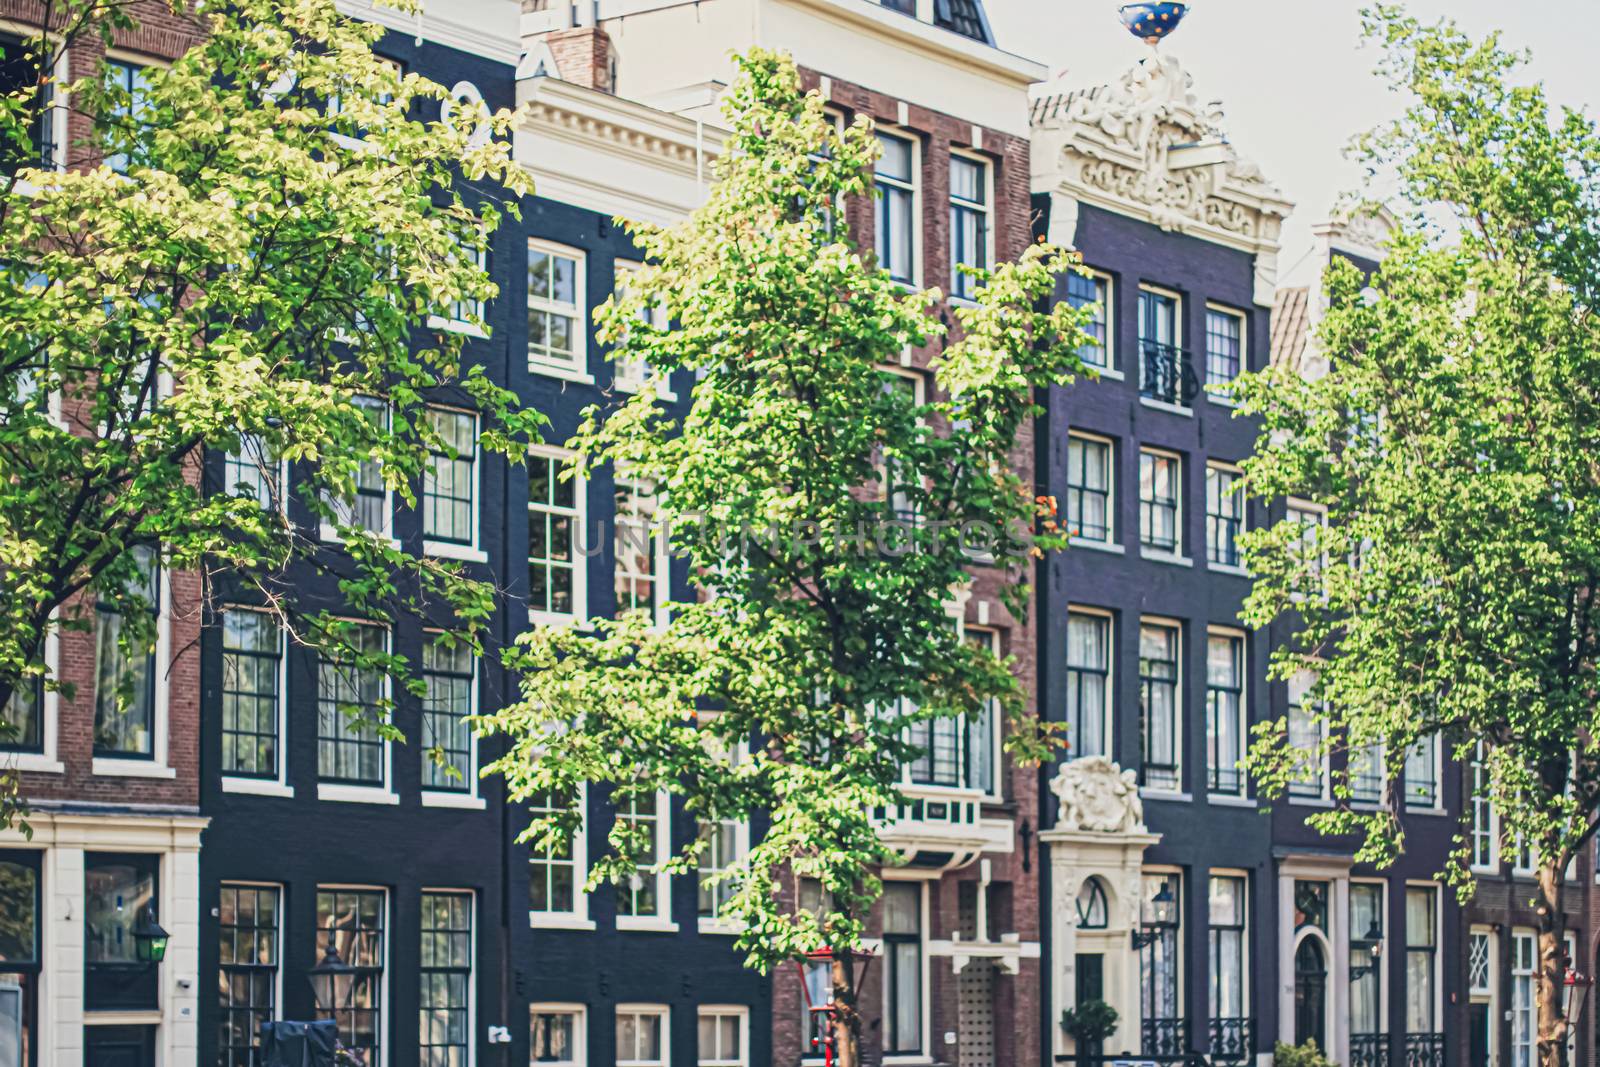 Main downtown street in the city center of Amsterdam in Netherlands by Anneleven